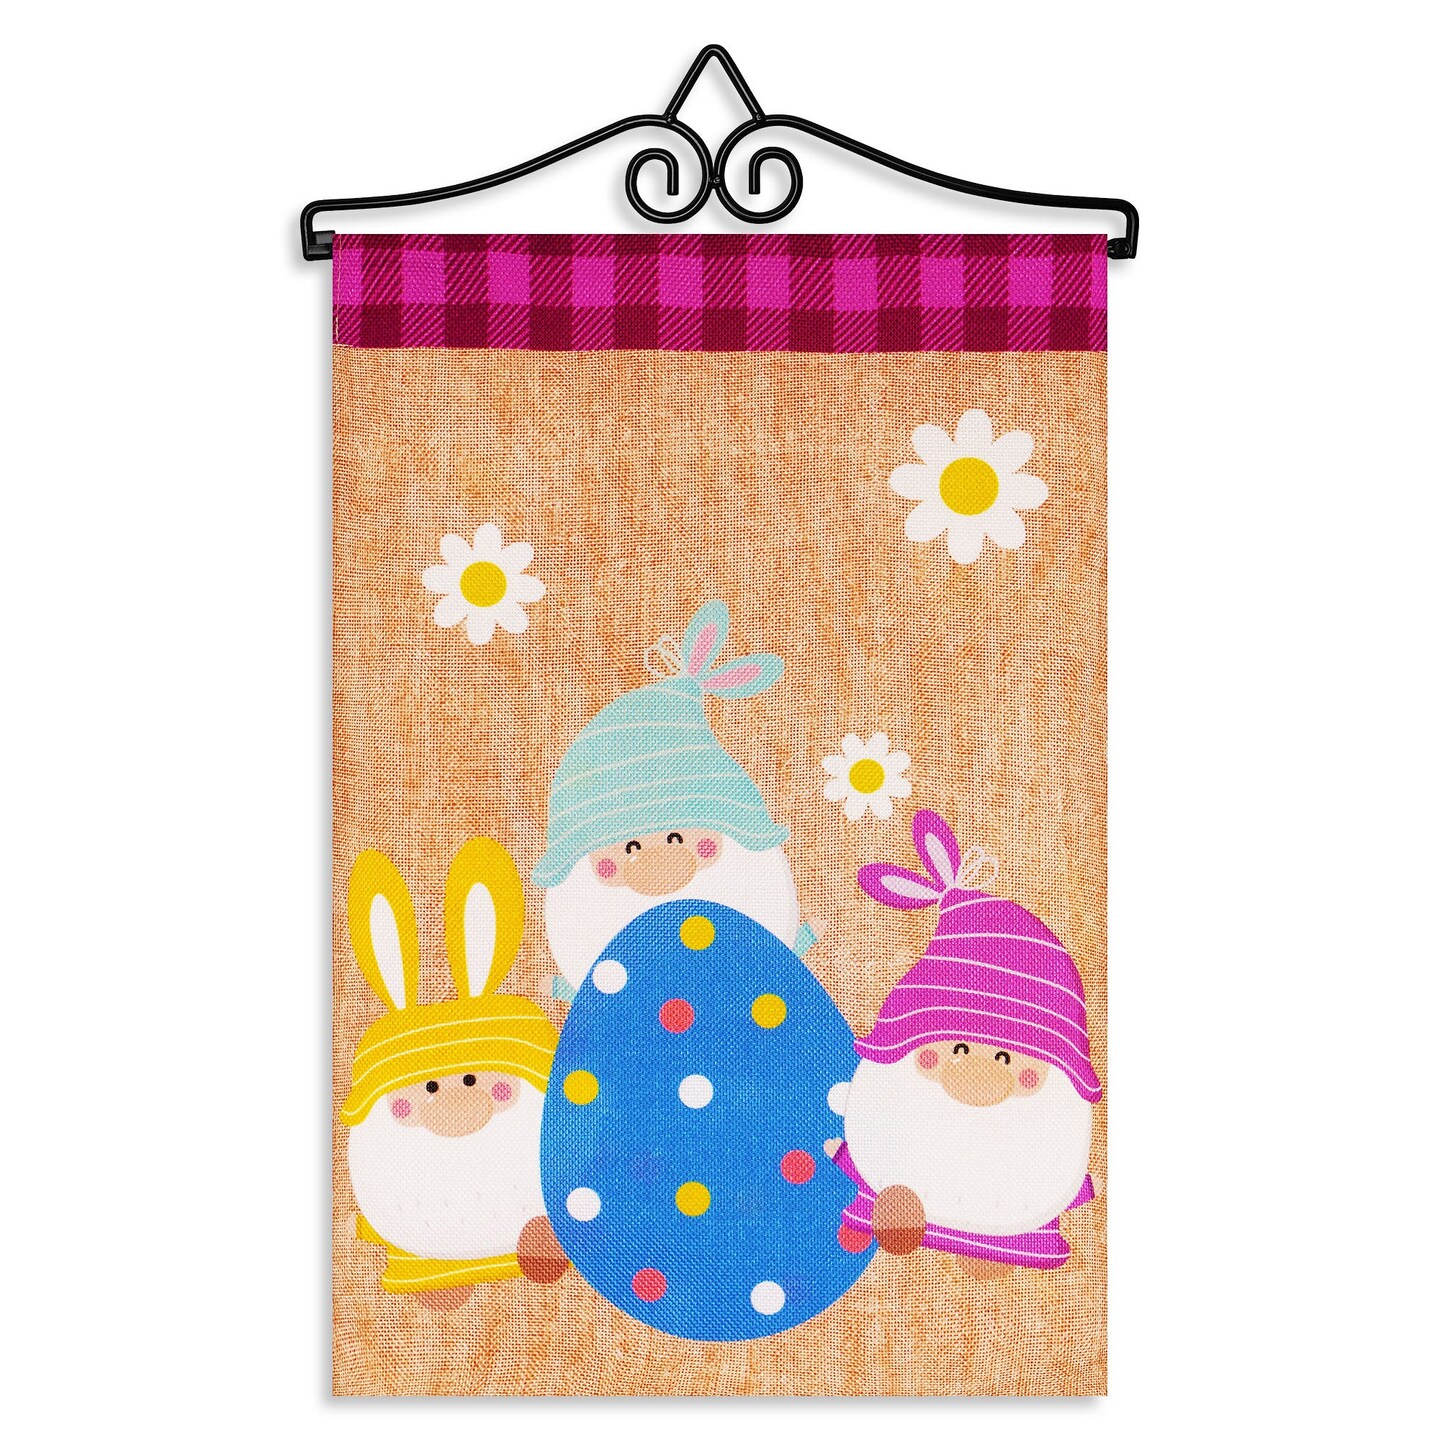 G128 Combo Pack Garden Flag Hanger 14IN &#x26; Garden Flag 3 Gnomes with Large Easter Egg 12x18IN Printed Double Sided Burlap Fabric